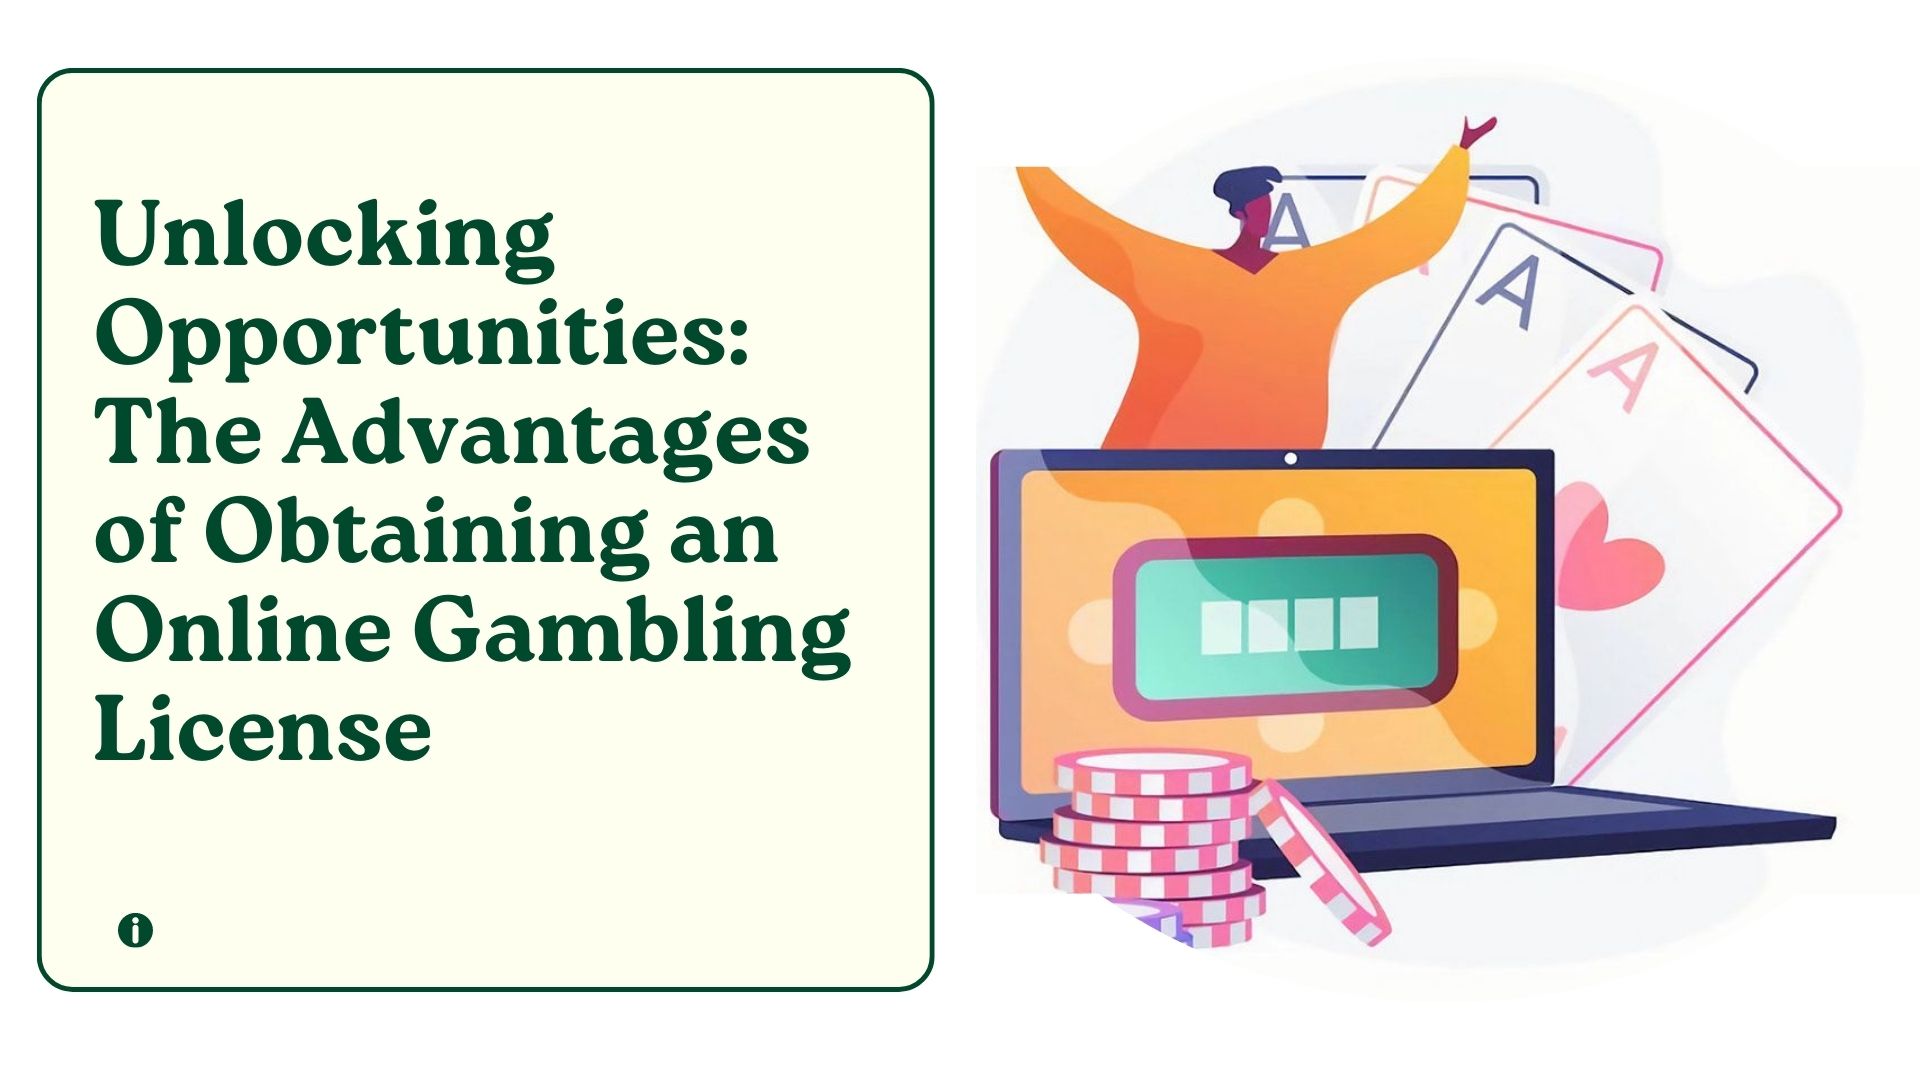 Unlocking Opportunities: The Advantages of Obtaining an Online Gambling License